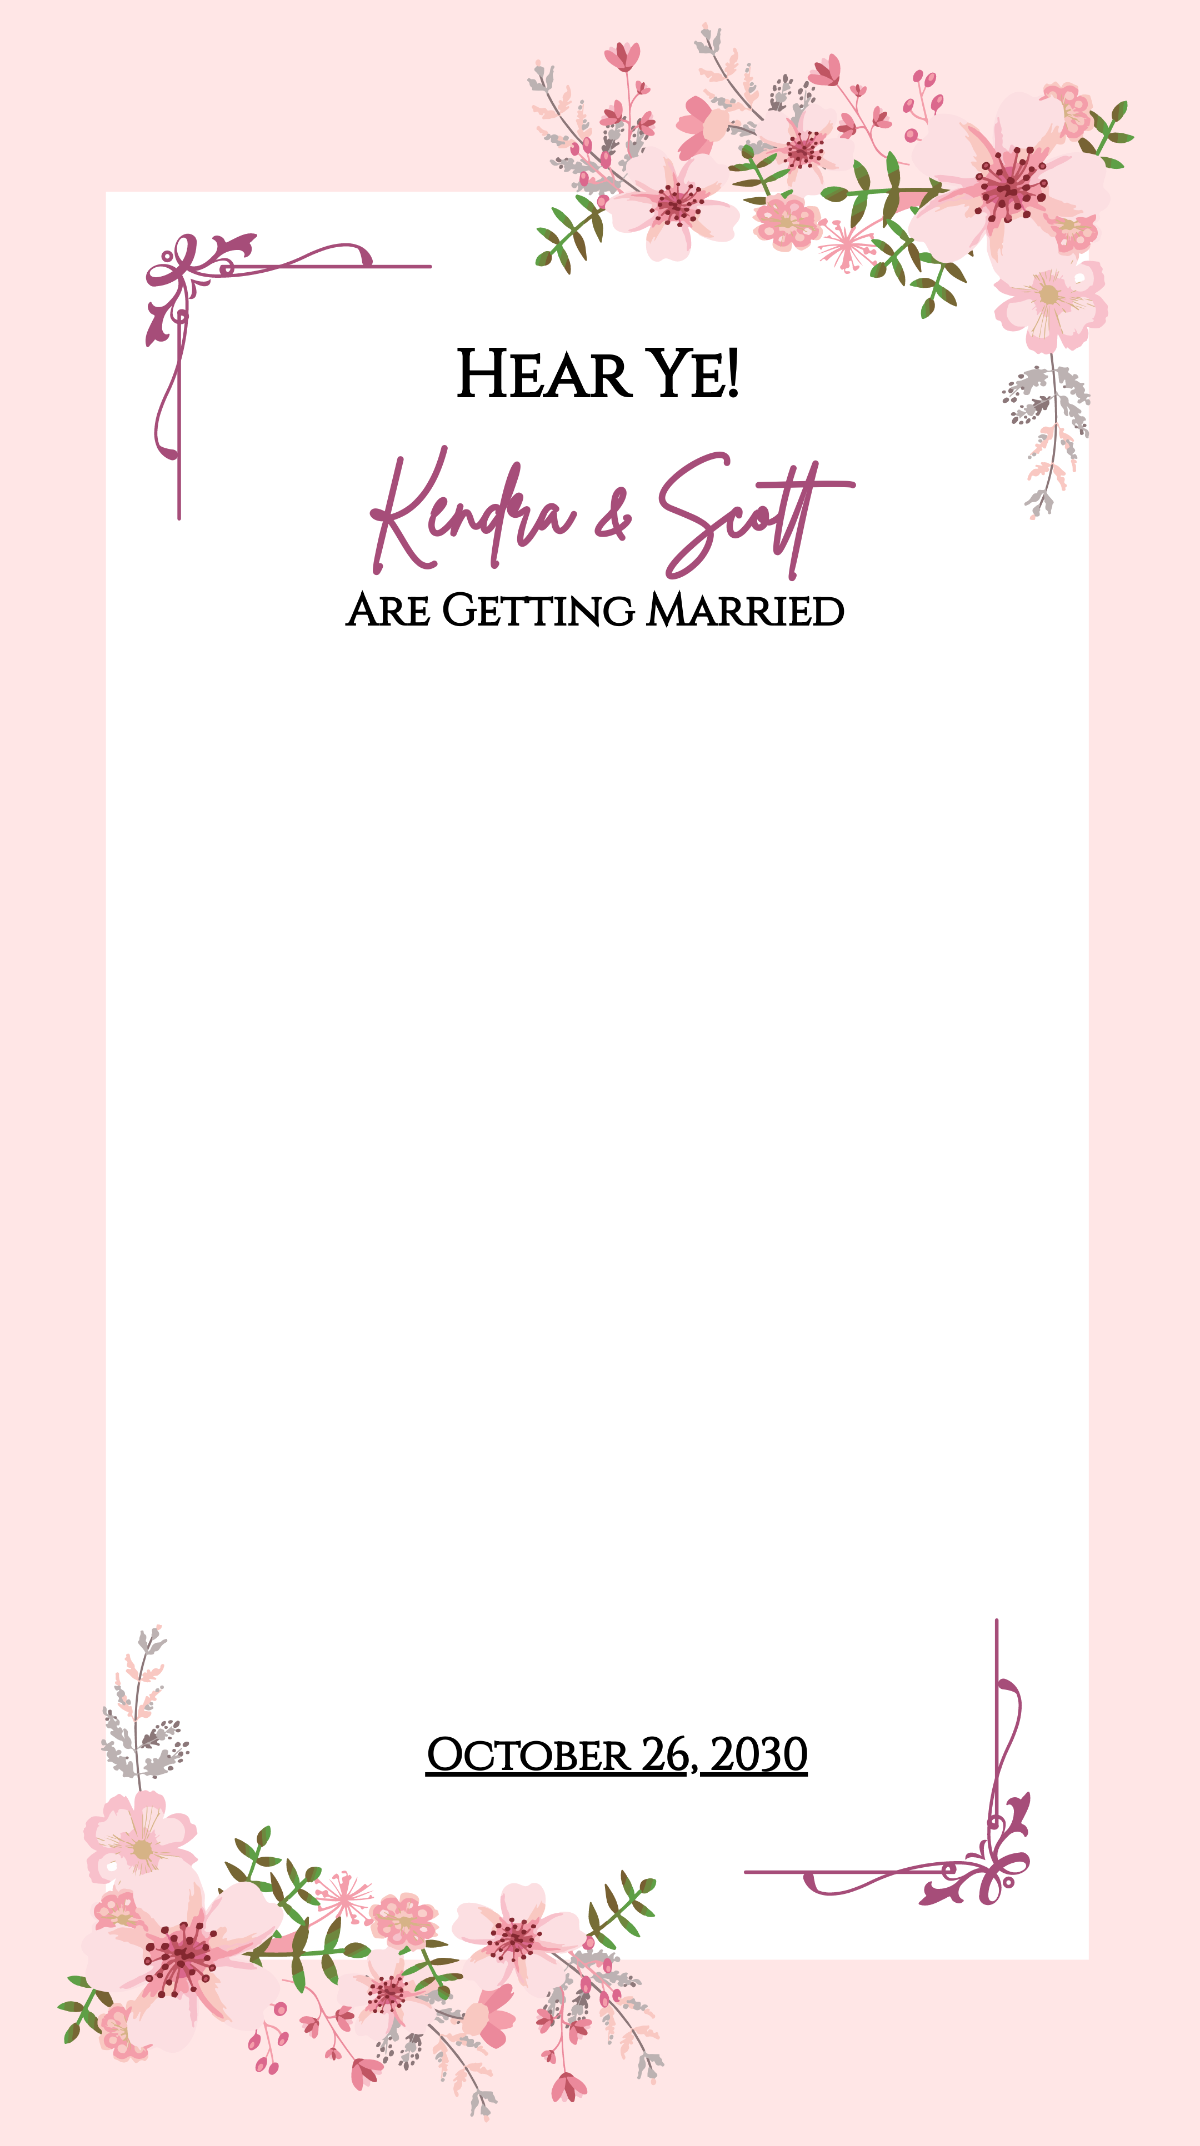 Wedding Announcement Snapchat Geofilter Template